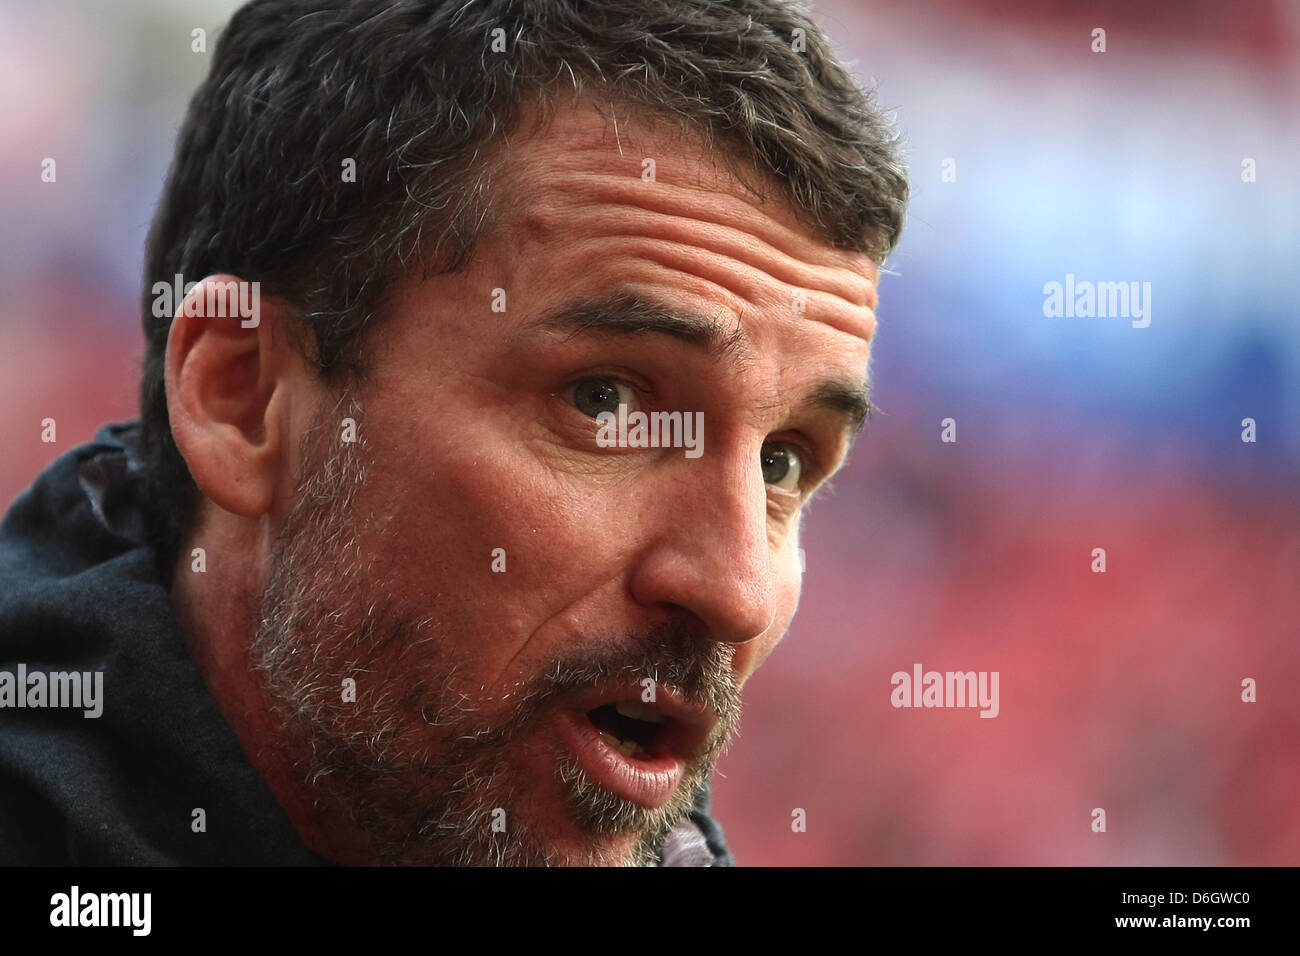 Kaiserslautern's head coach Marco Kurz is seen before the German Bundesliga match between 1. FSV Mainz 05 and 1. FC Kaiserslautern at the Coface Arena in Mainz, Germany, 25 February 2012. Photo: FREDRIK VON ERICHSEN    (ATTENTION: EMBARGO CONDITIONS! The DFL permits the further  utilisation of the pictures in IPTV, mobile services and other new  technologies only no earlier than tw Stock Photo